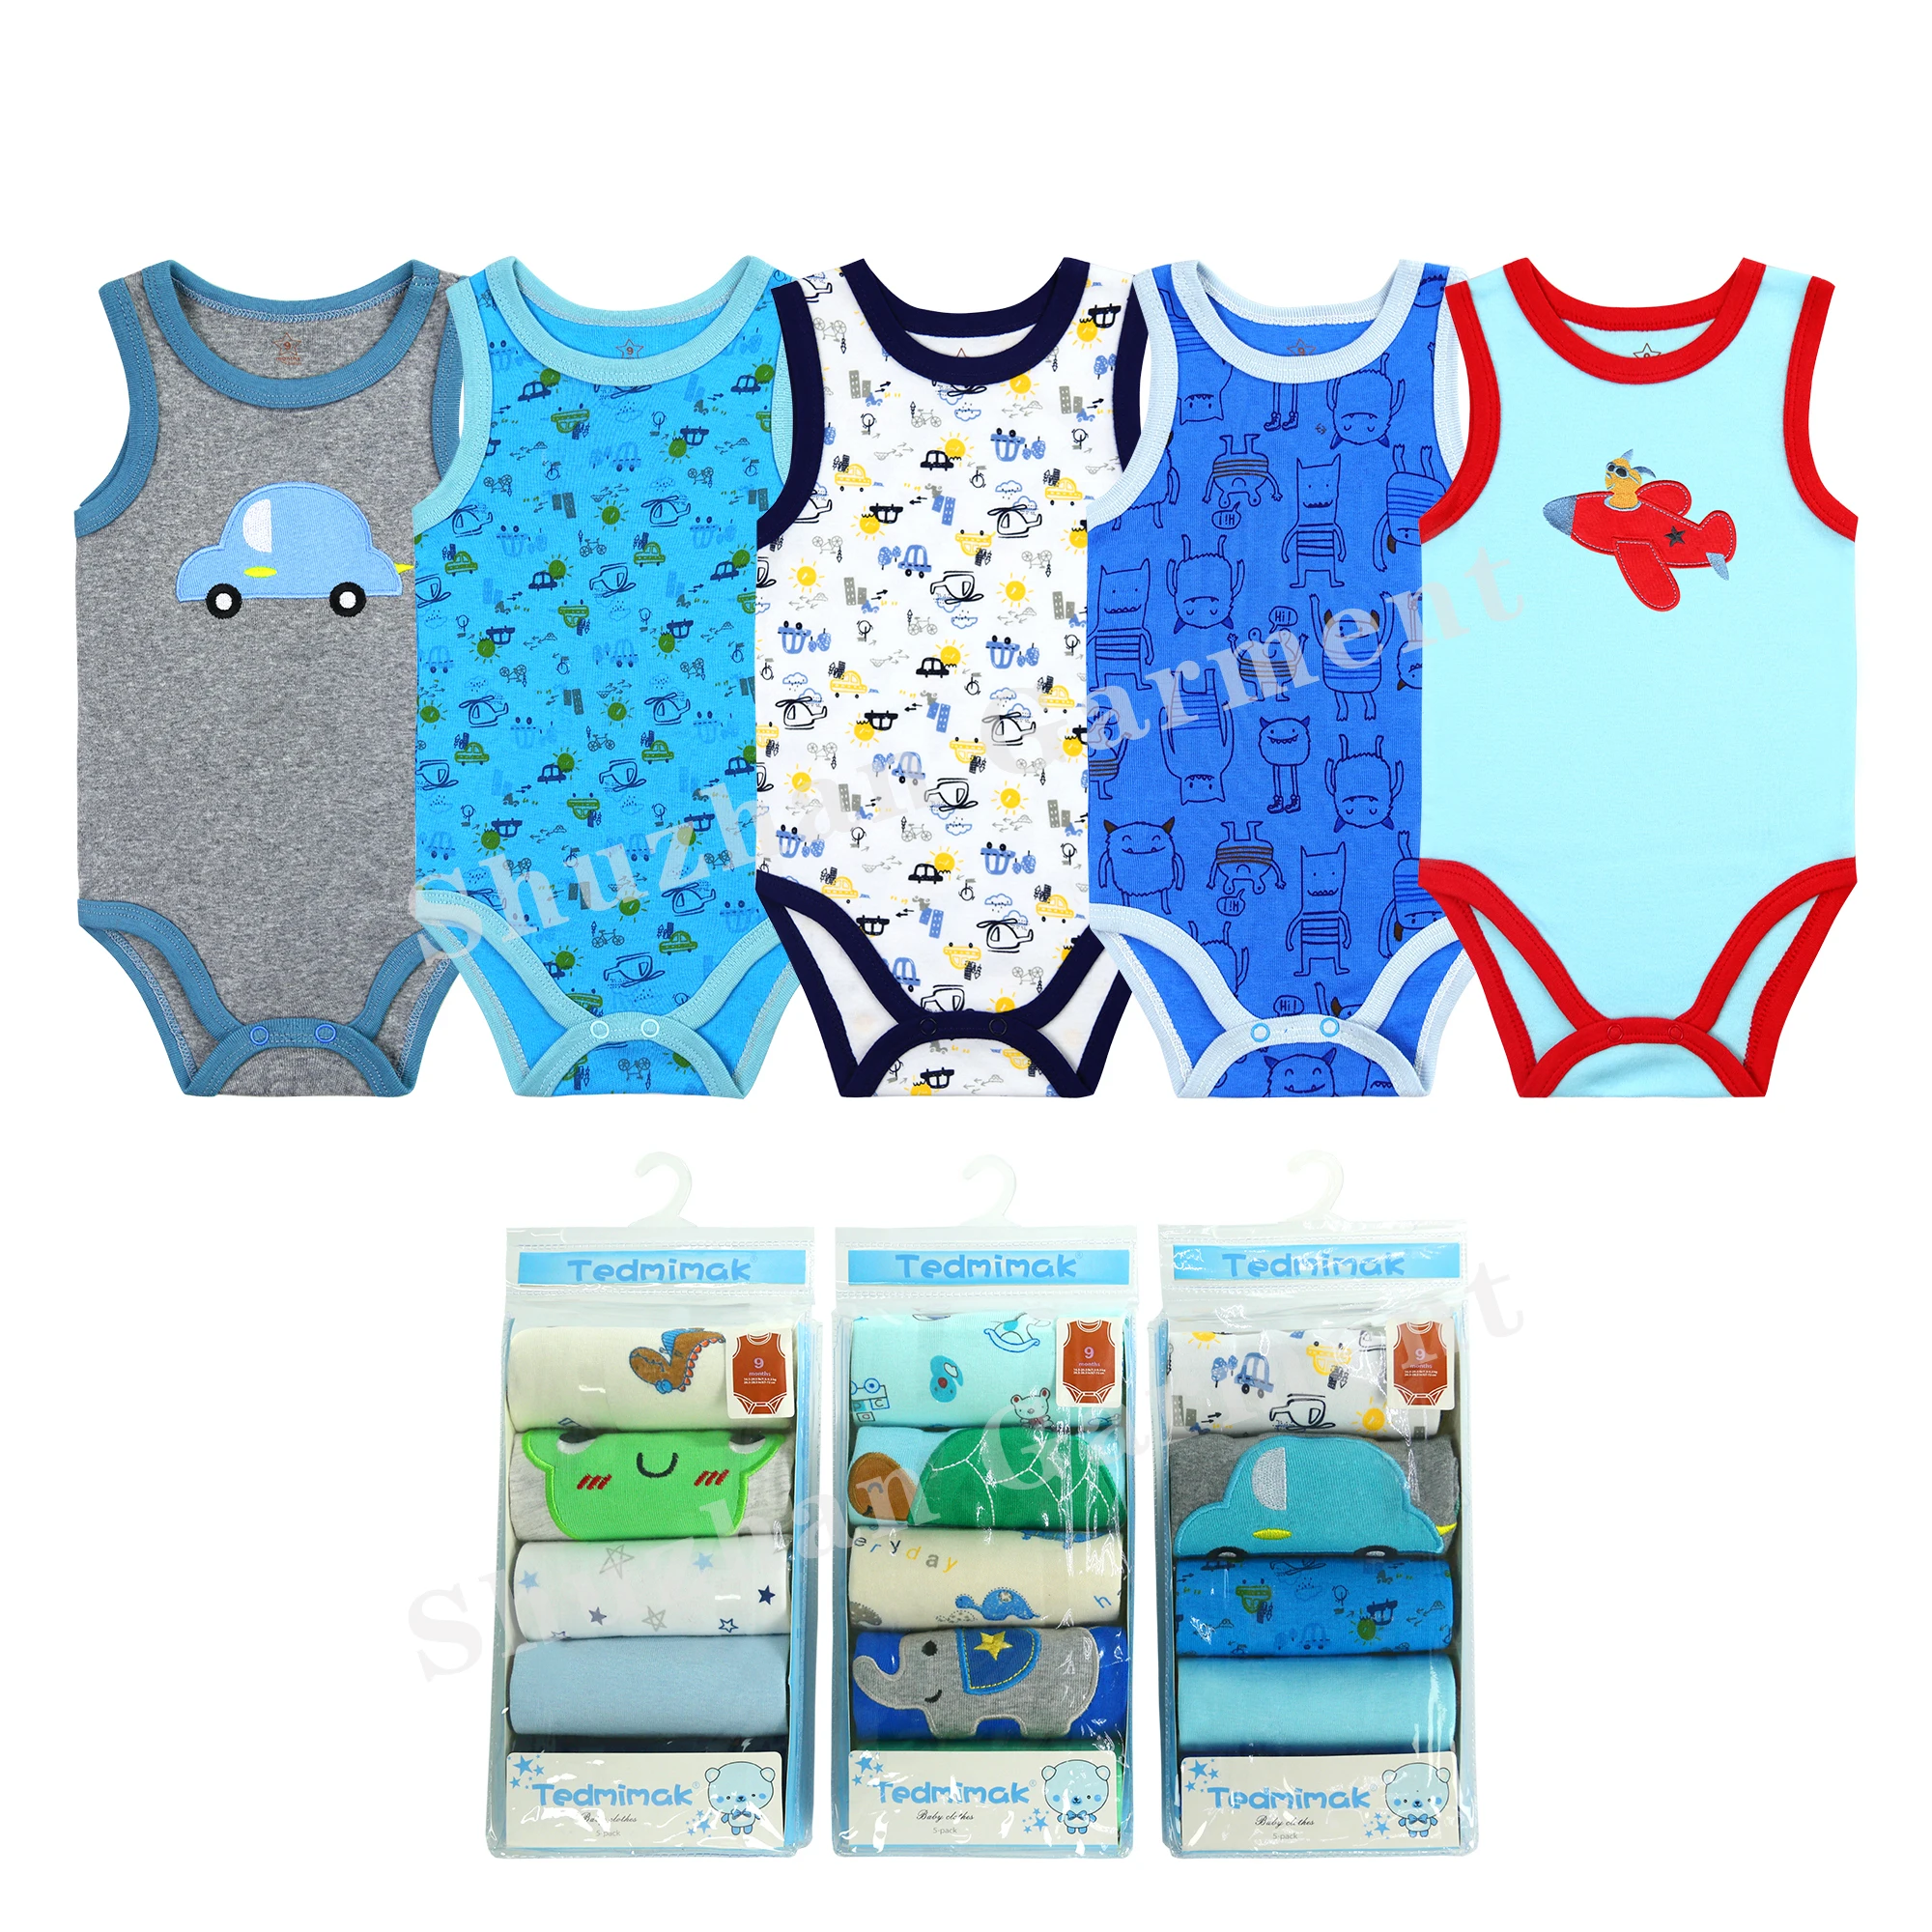 

Infants clothing knitted cotton baby clothes 5 pack sleeveless summer baby romper pajamas bodysuits, Mixed colors in same size per bag